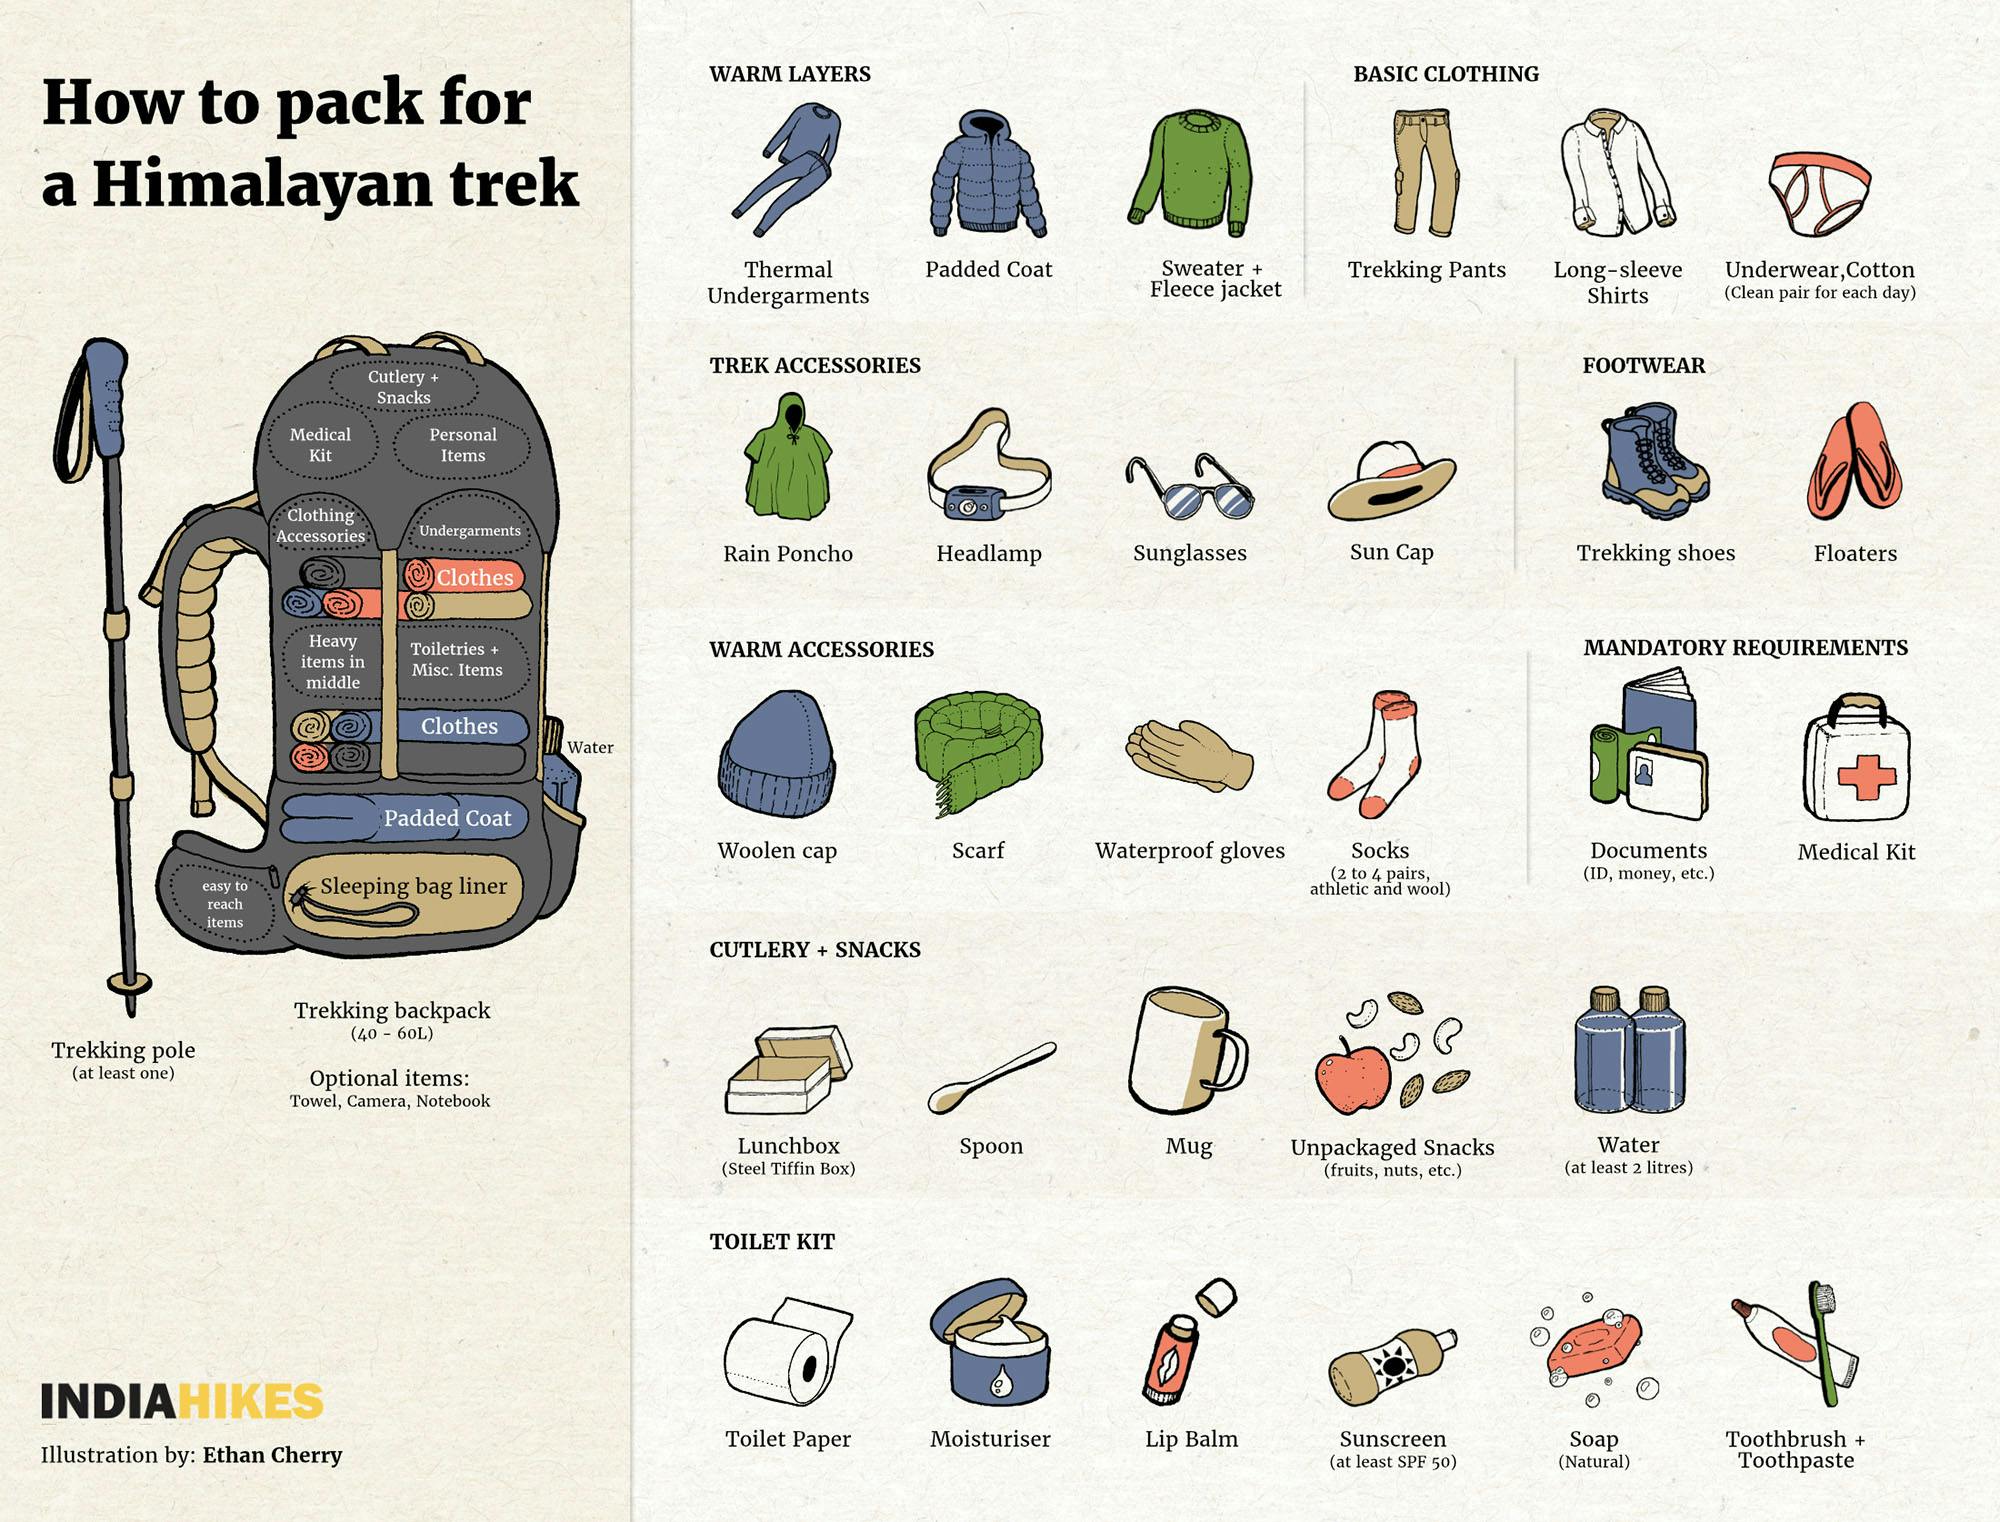 855b8667 f269 490c b49a 3eca39d2ea20 indiahikes packing guide